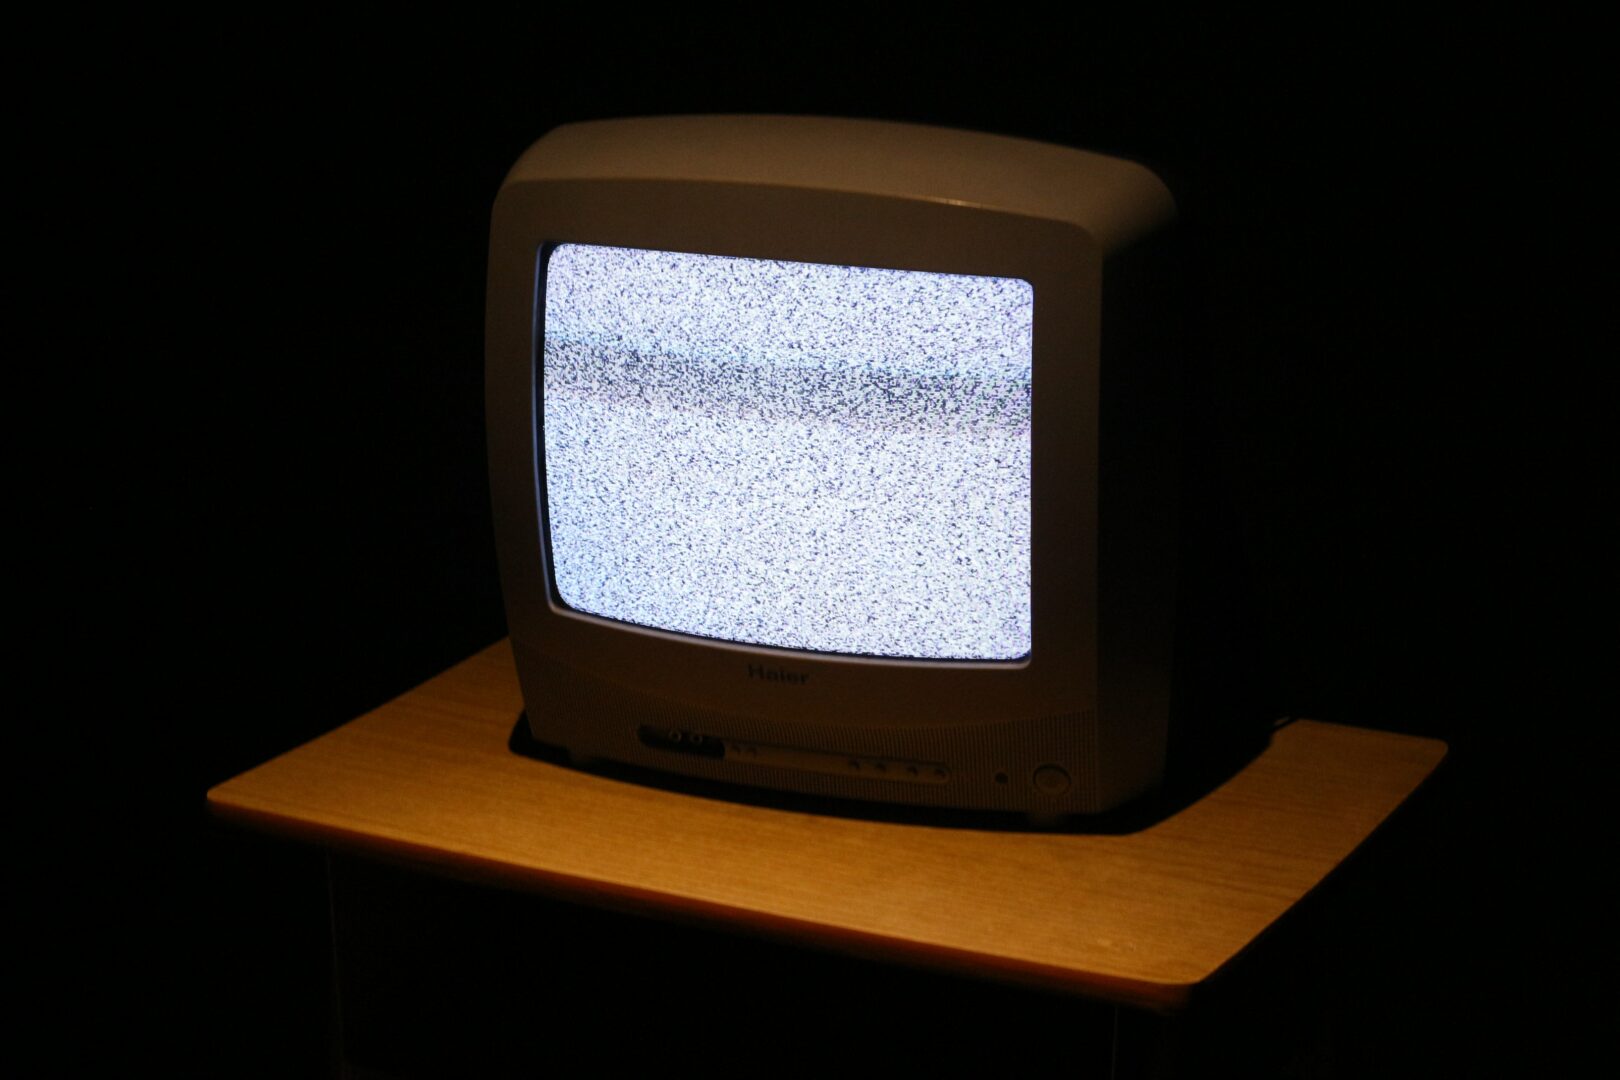 How Long Should a TV Be On a Day?